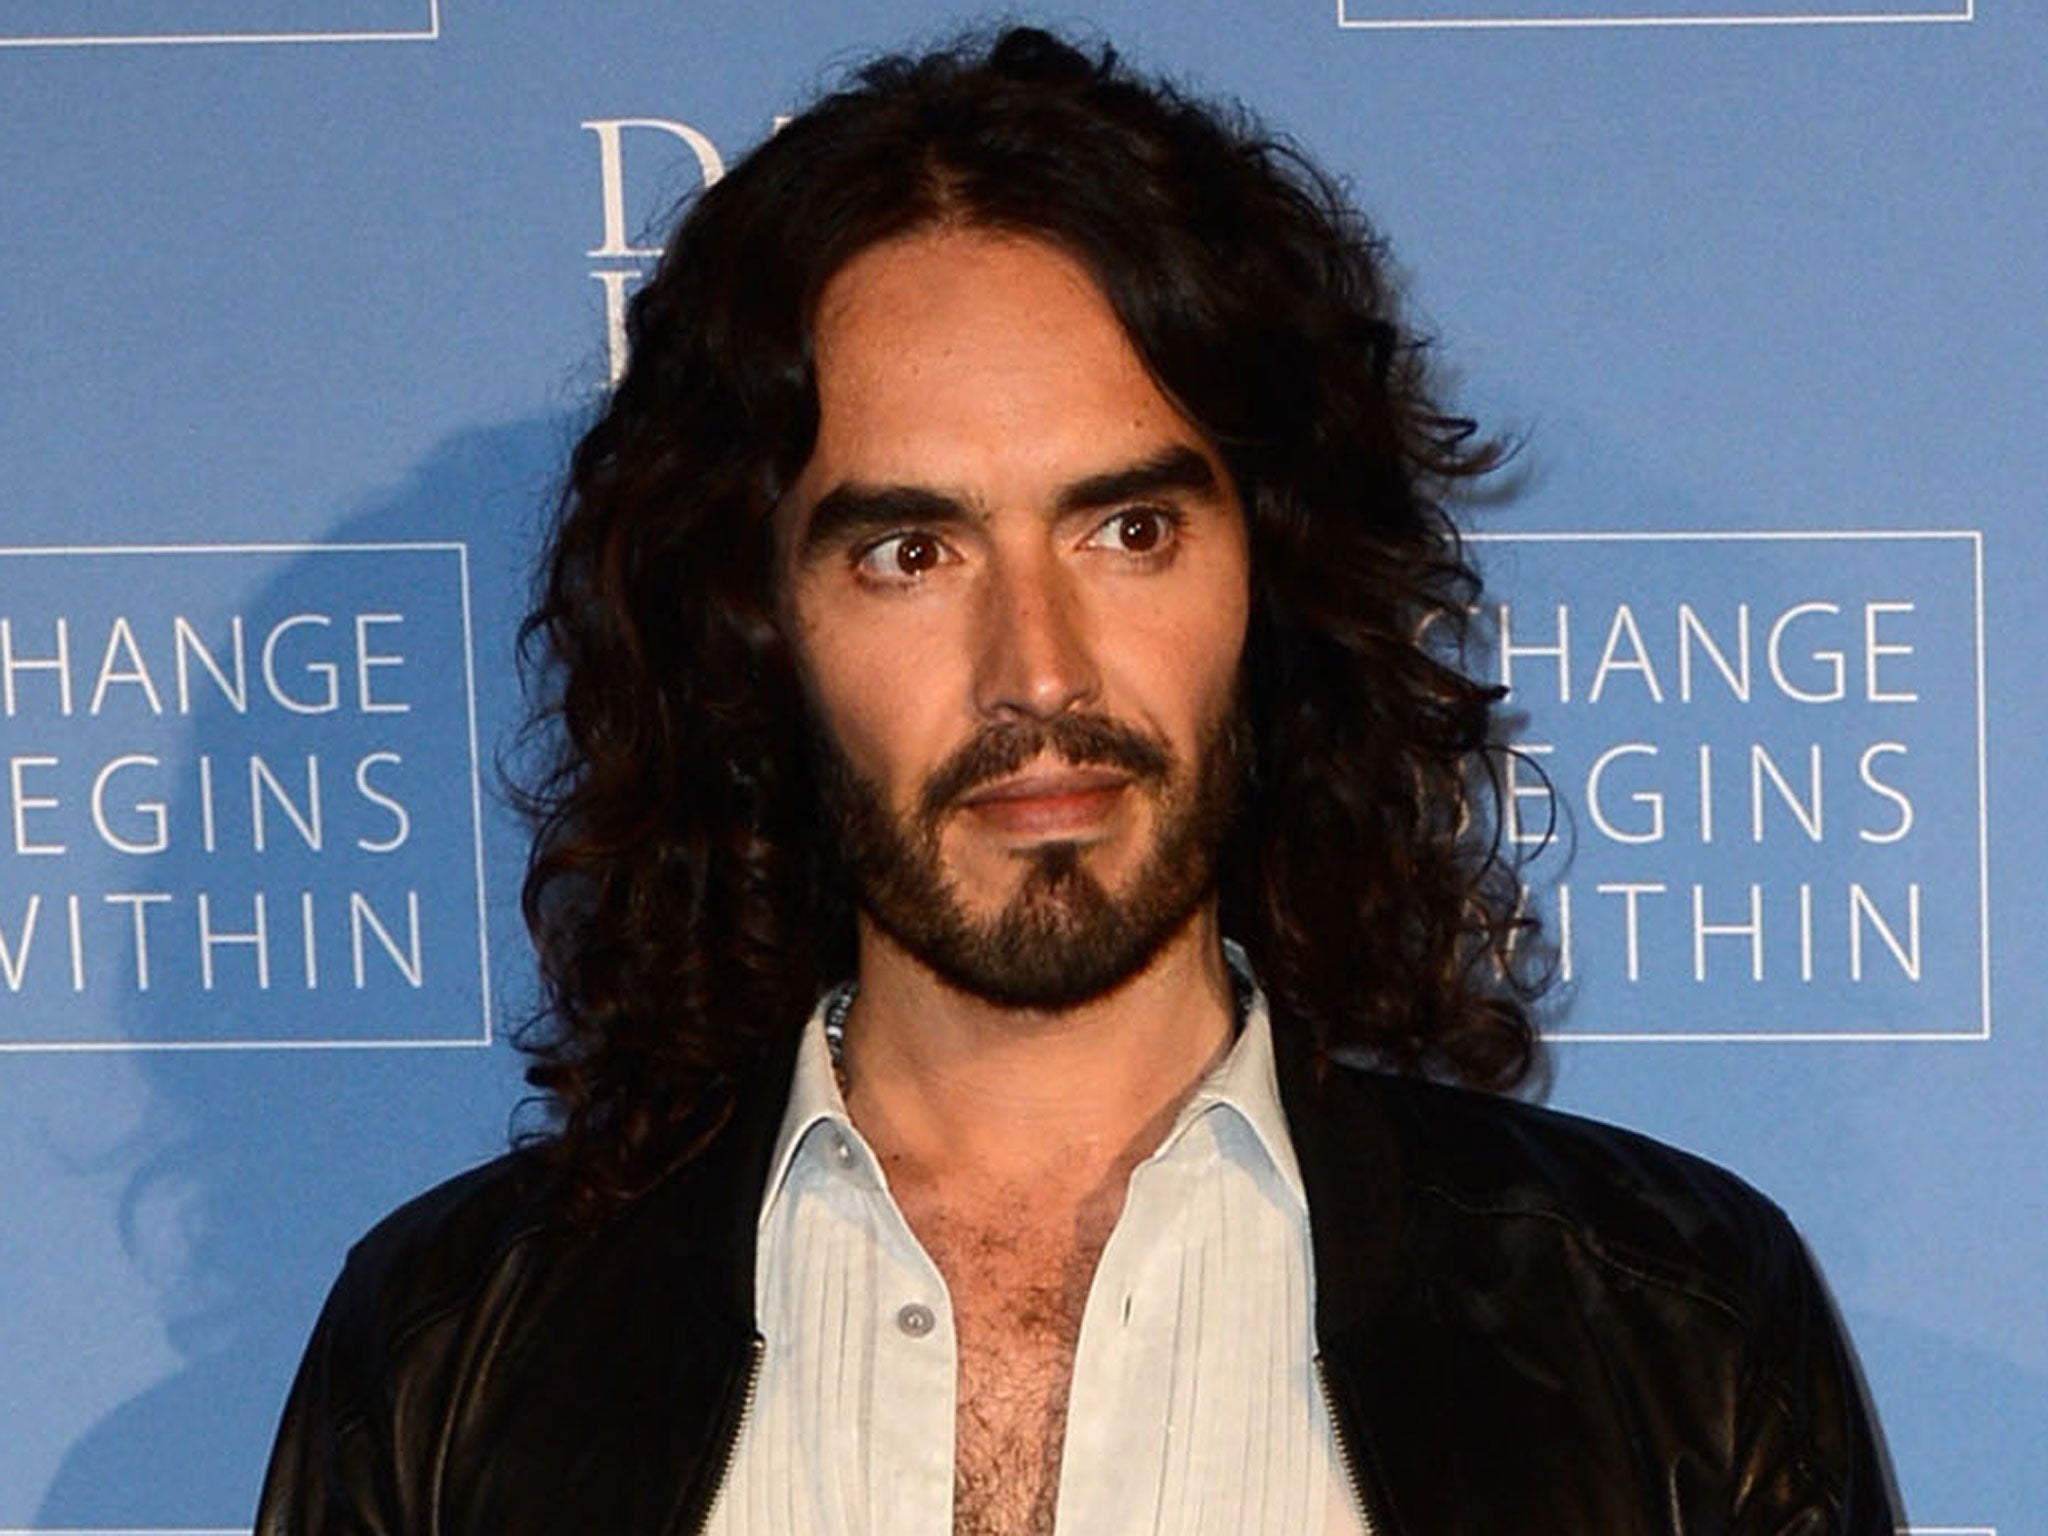 Russell Brand, the comedian, was a target last week of celebrity swatting